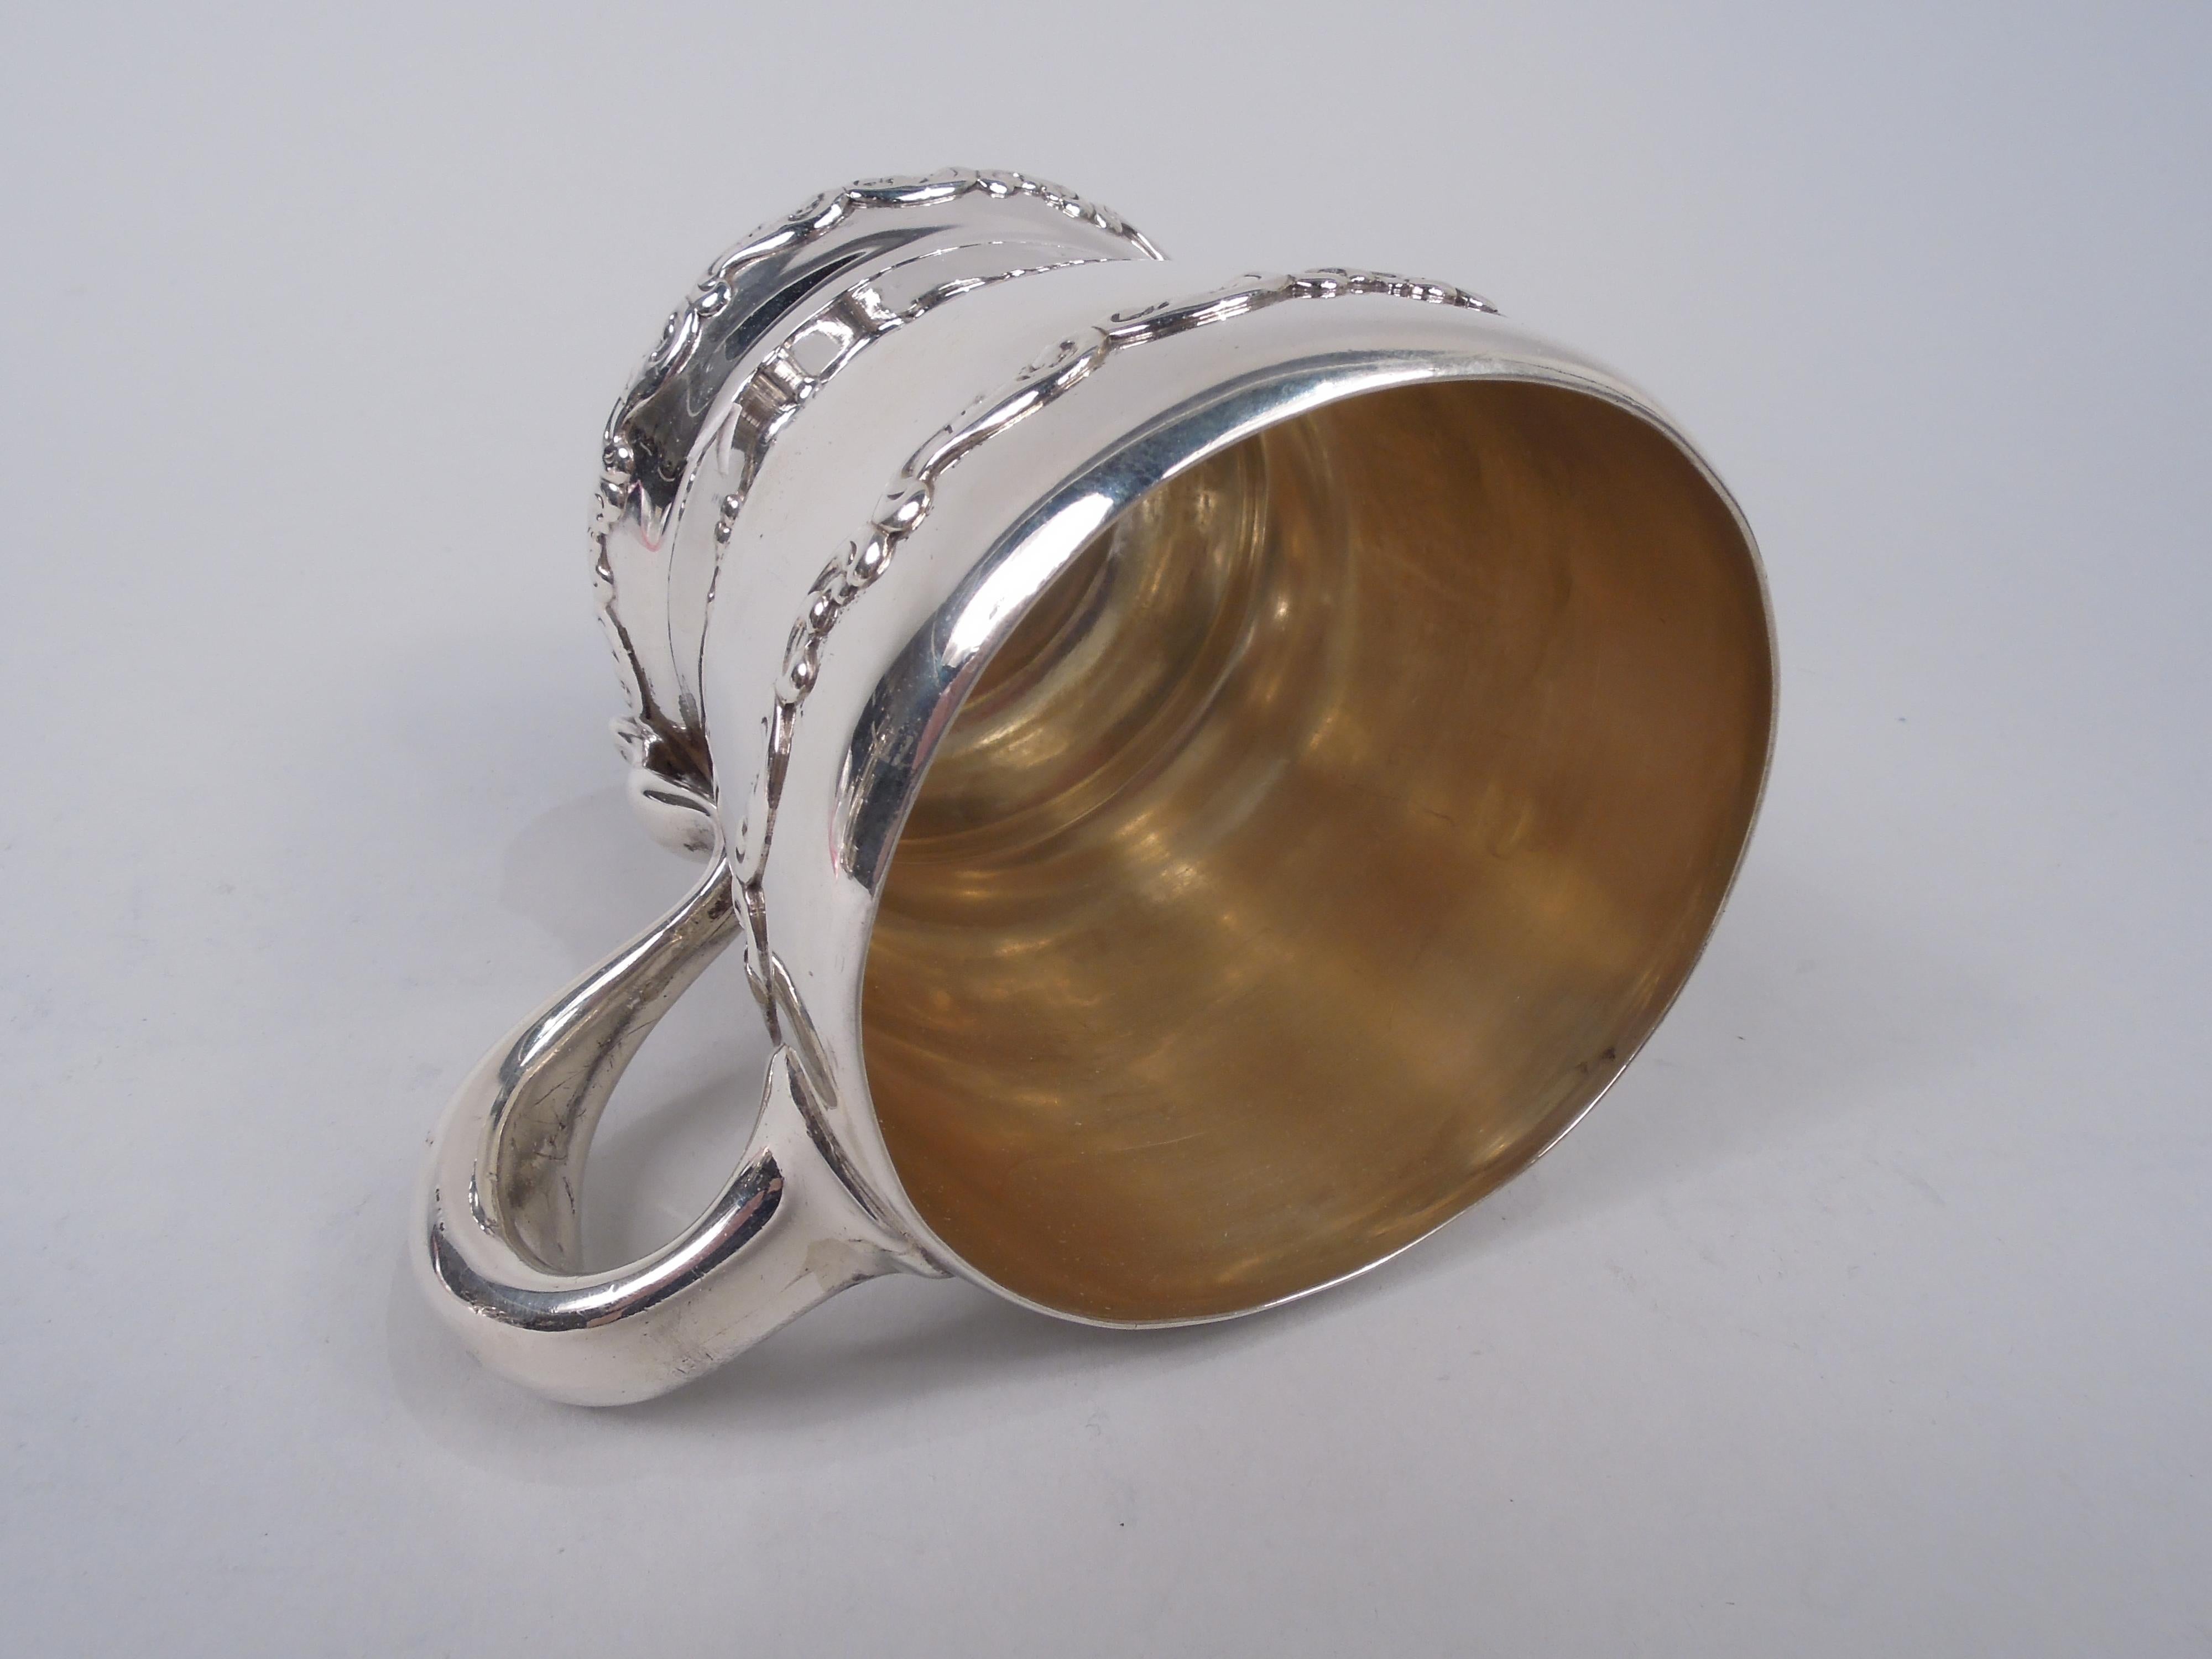 American Antique Whiting Edwardian Classical Sterling Silver Baby Cup